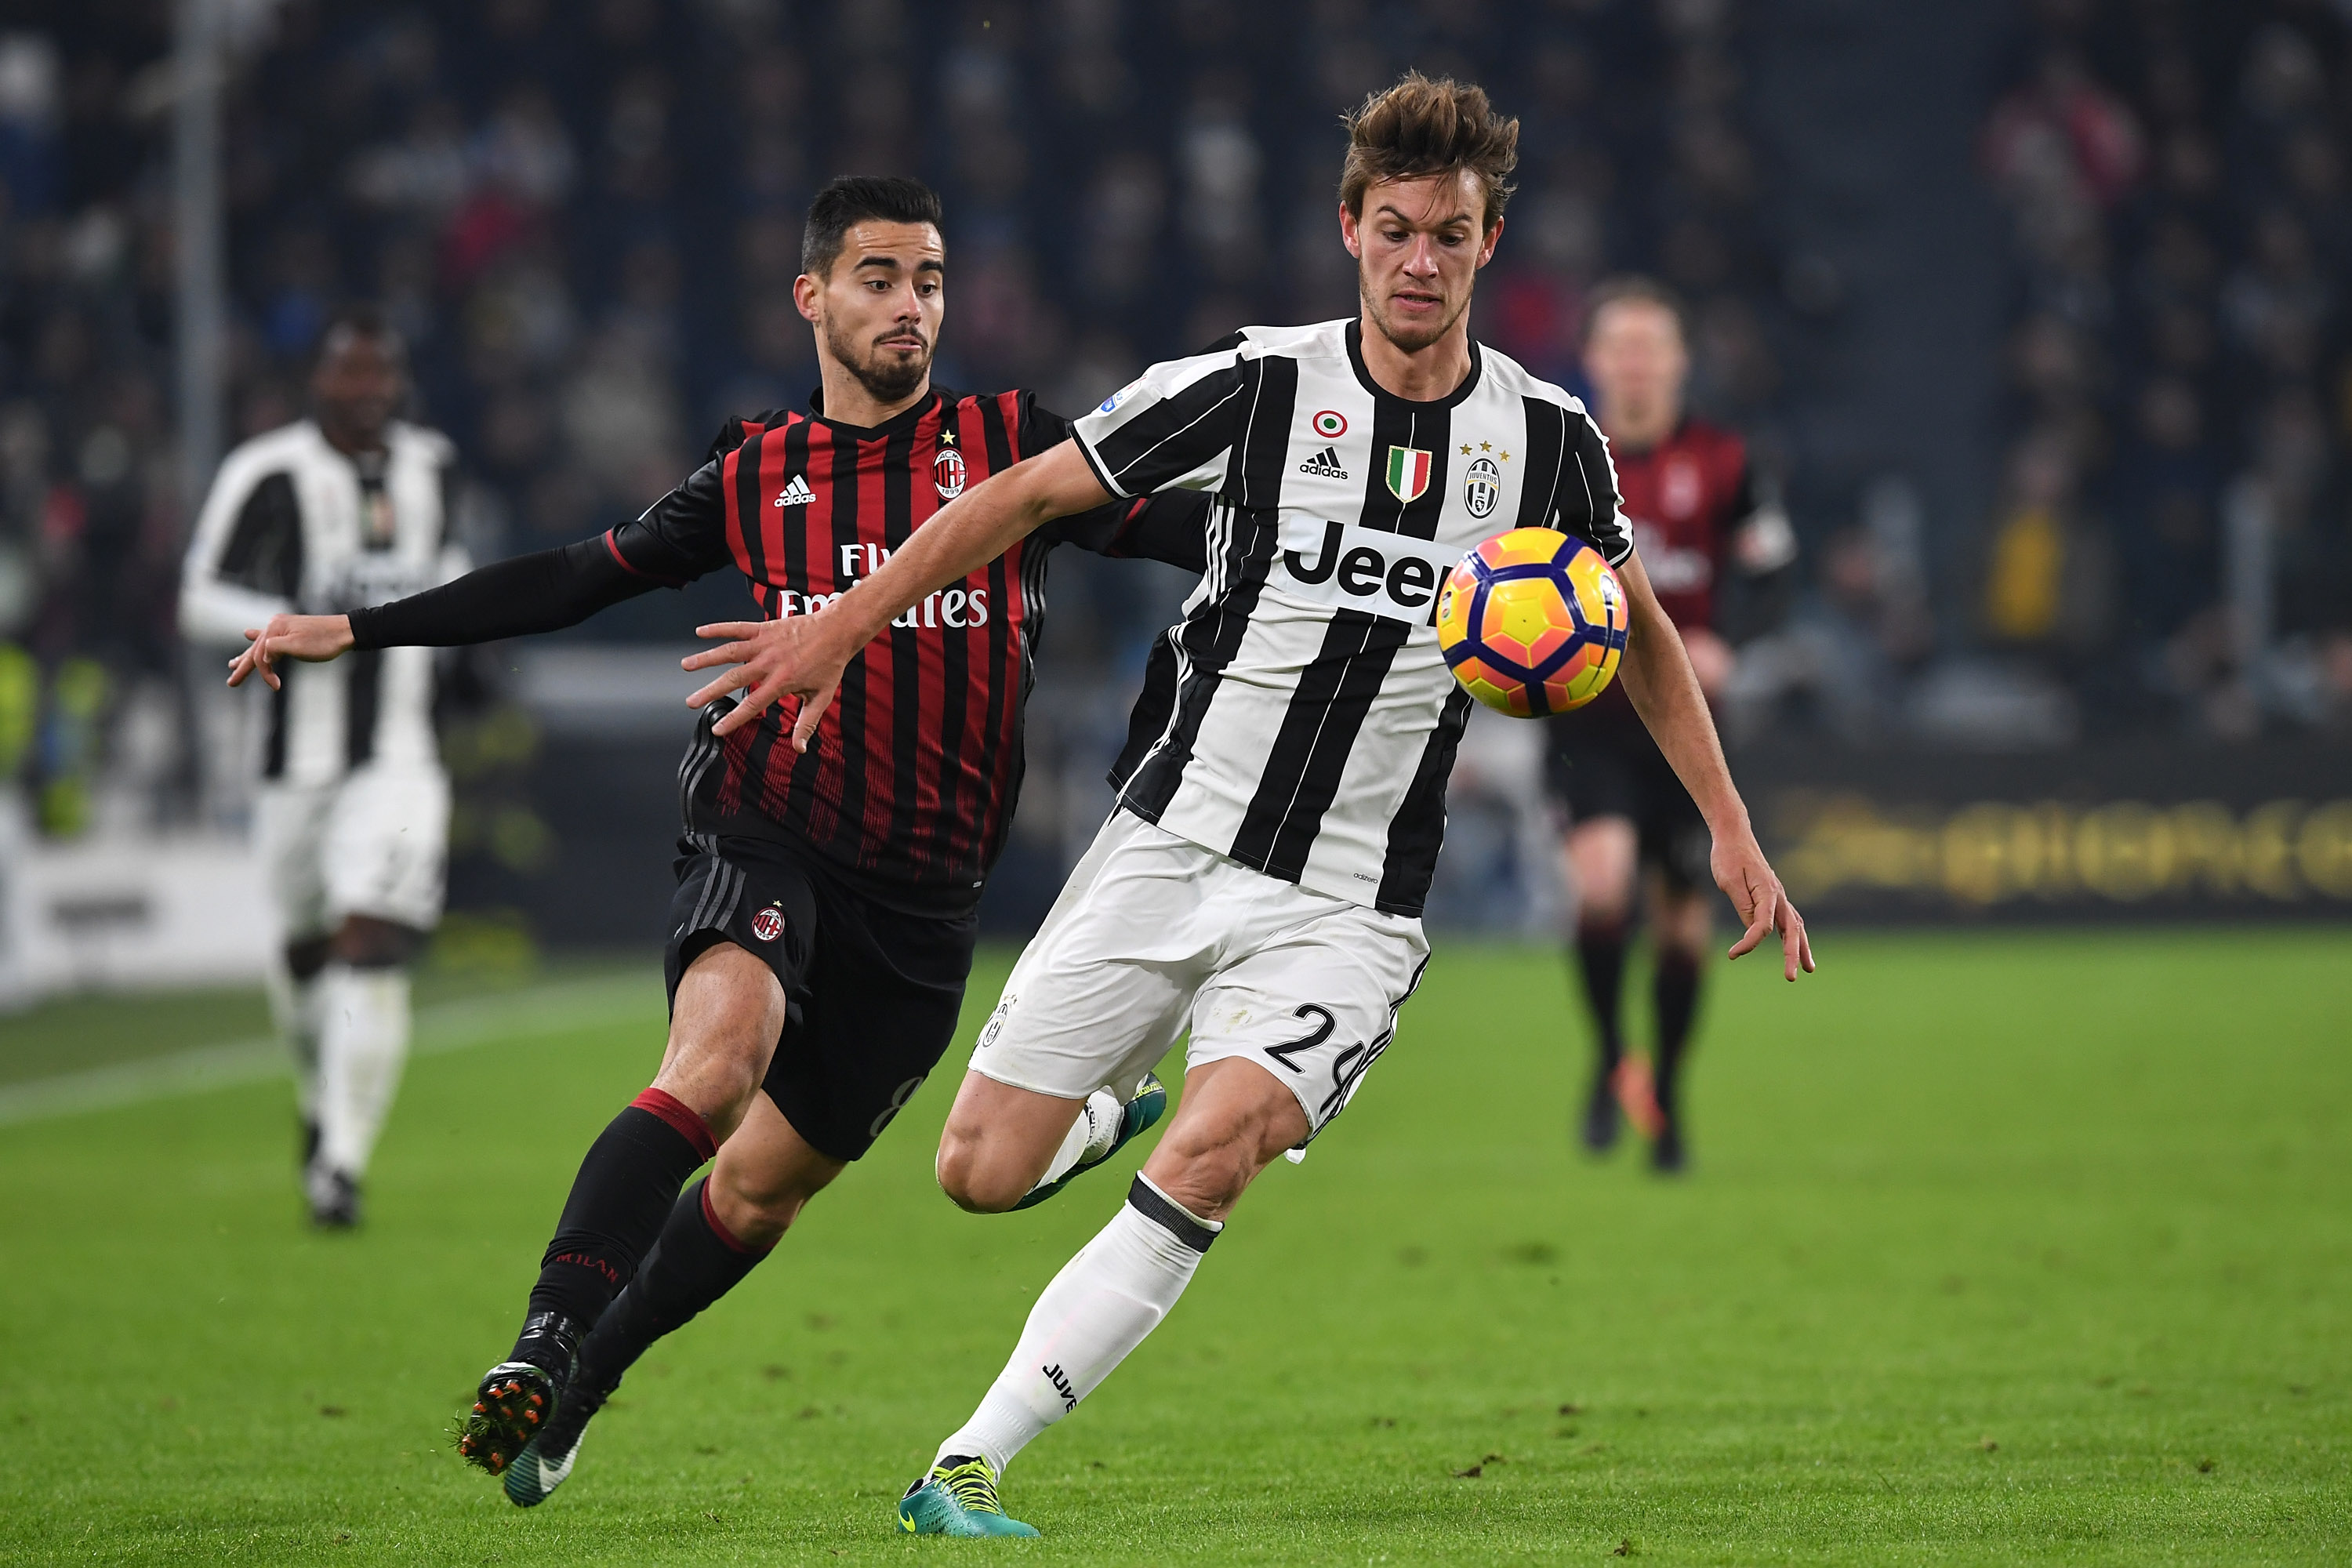 TURIN, ITALY - JANUARY 25:  Daniele Rugani (R) of Juventus FC is challenged by Fernandez Suso of AC Milan during the TIM Cup match between Juventus FC and AC Milan at Juventus Stadium on January 25, 2017 in Turin, Italy.  (Photo by Valerio Pennicino/Getty Images)